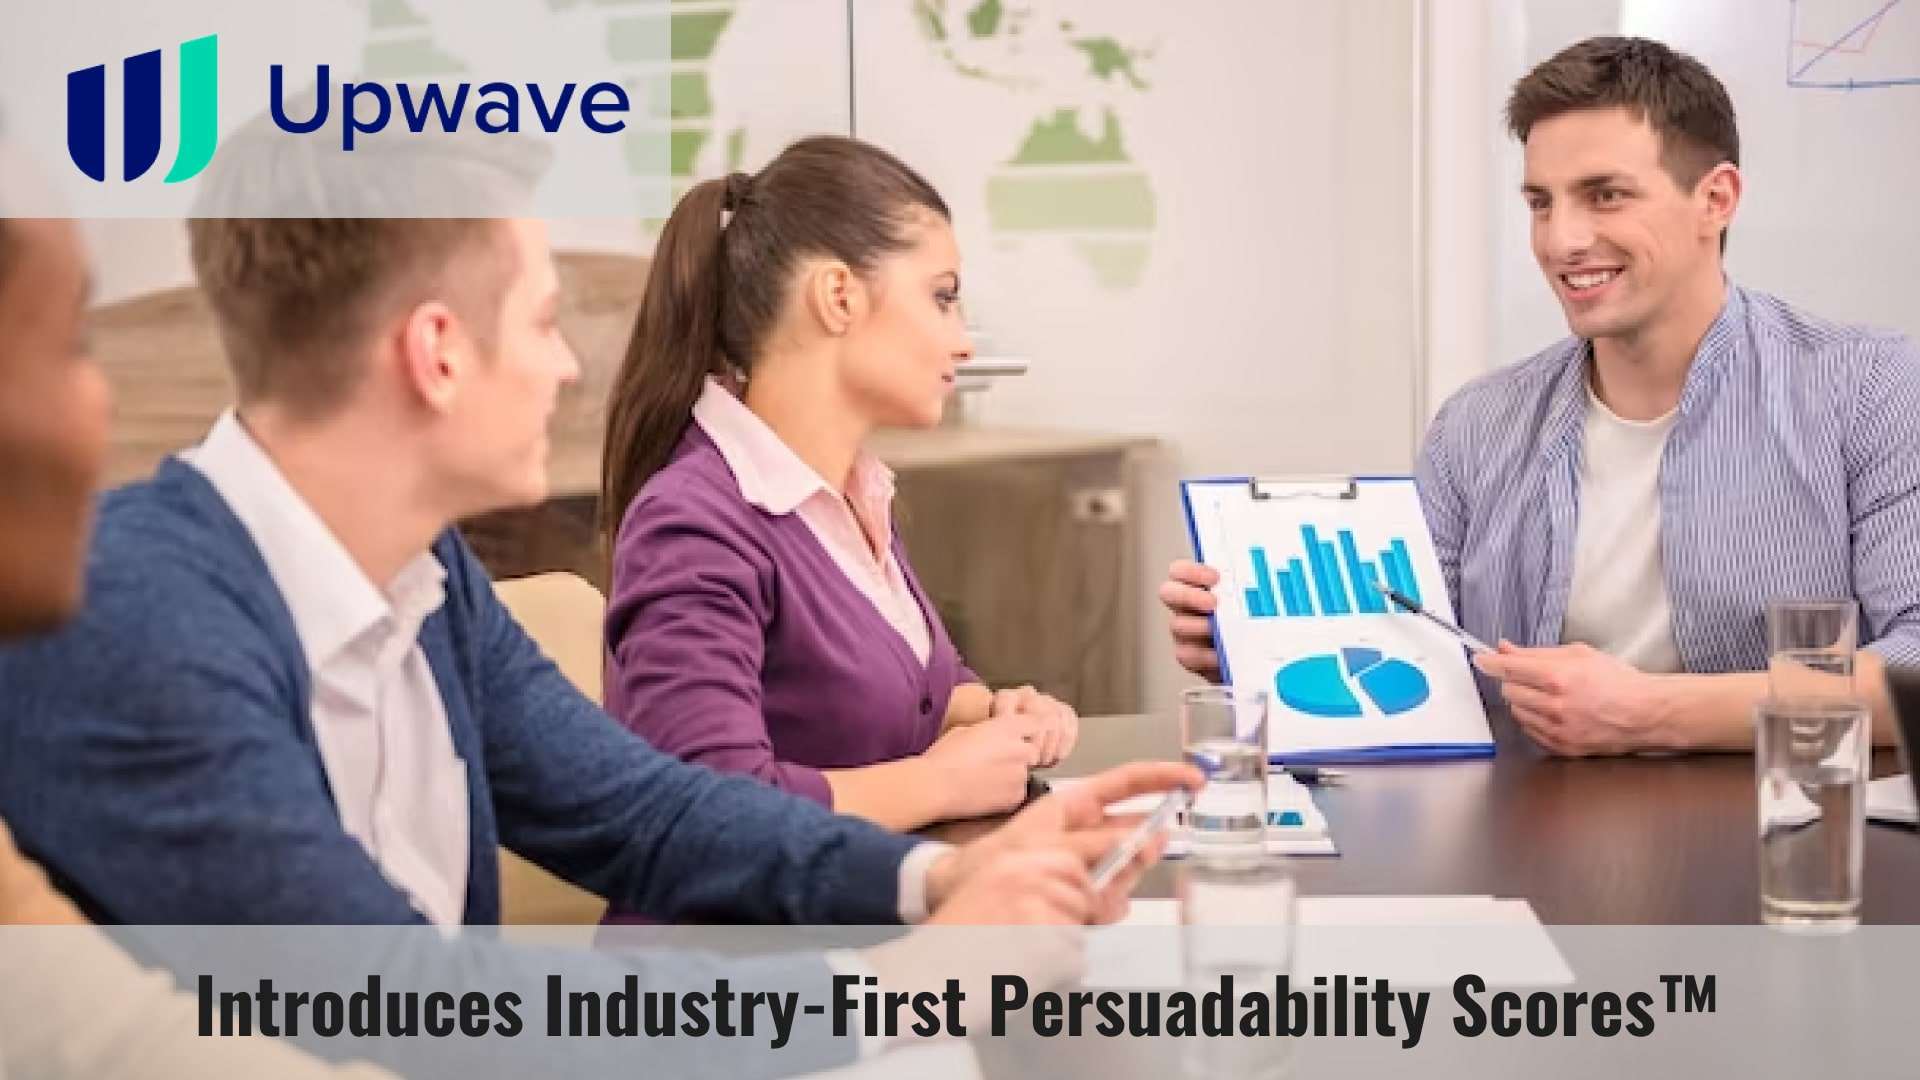 Upwave Introduces Industry-First Persuadability Scores™ to Auto-Optimize Brand Investment and Drive Higher Brand Outcomes like Awareness, Consideration, Purchase Intent, and More